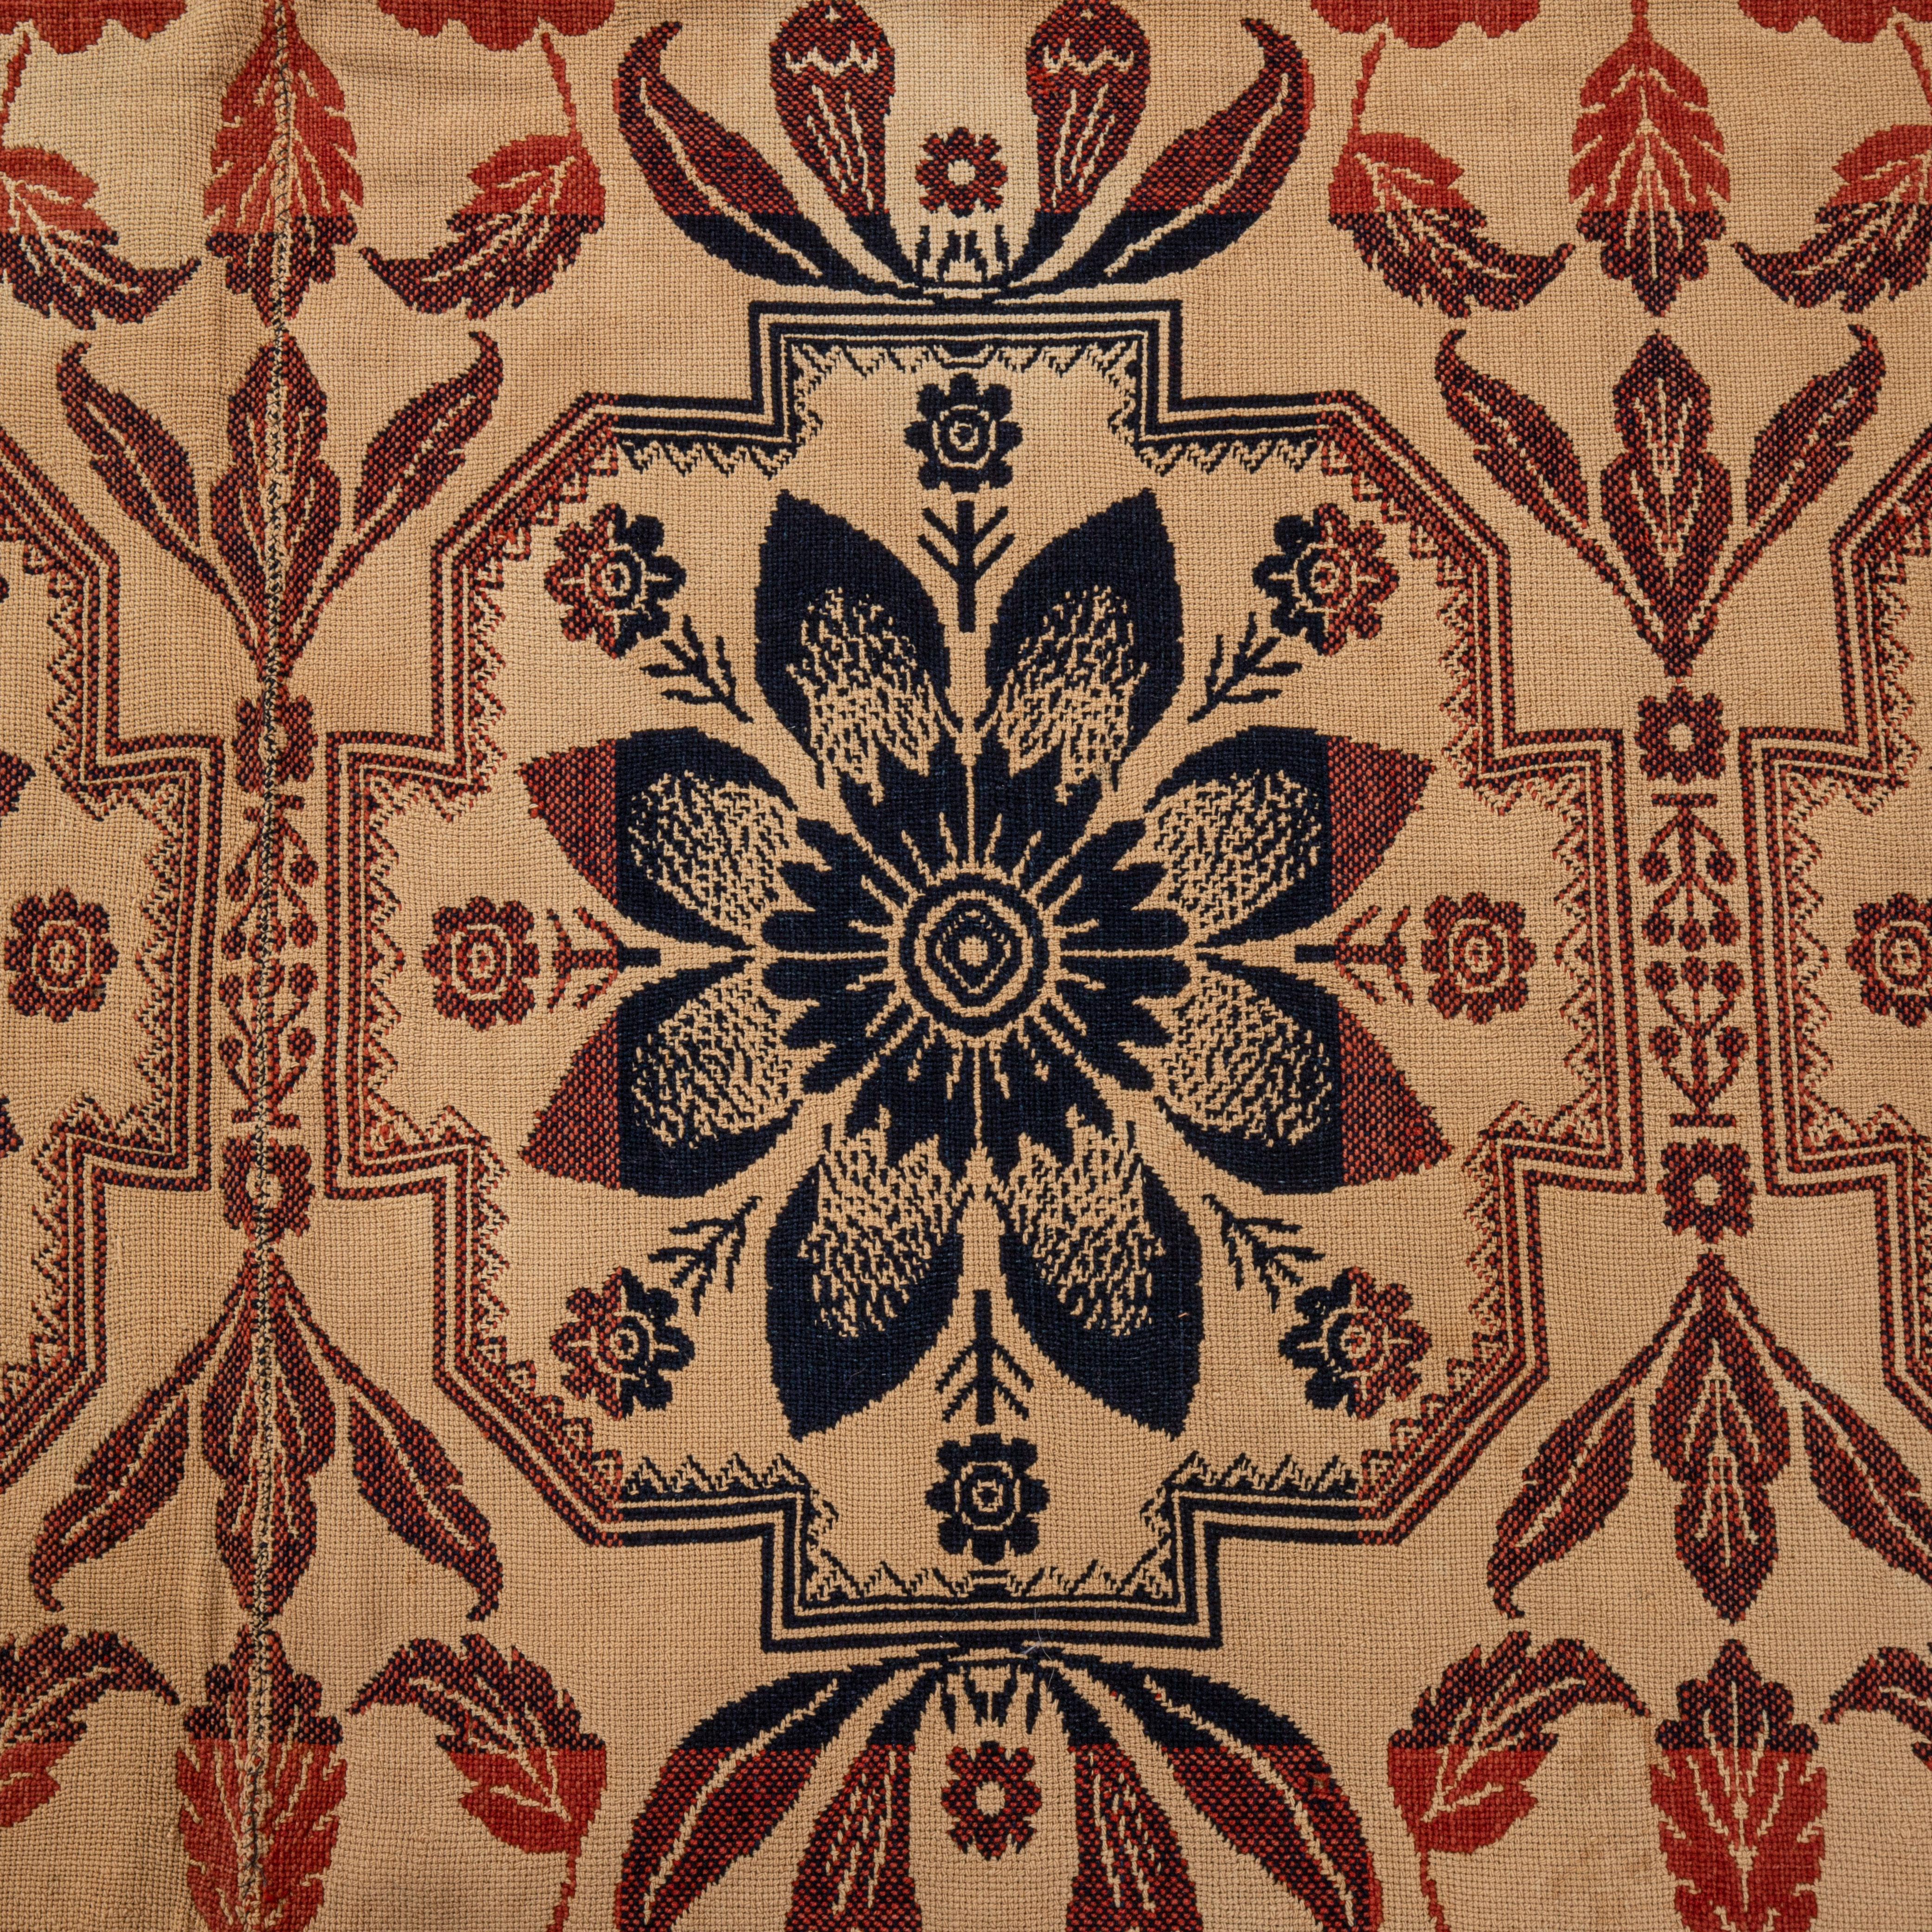 Jaquard Woven American Coverlet 19th C. For Sale 3